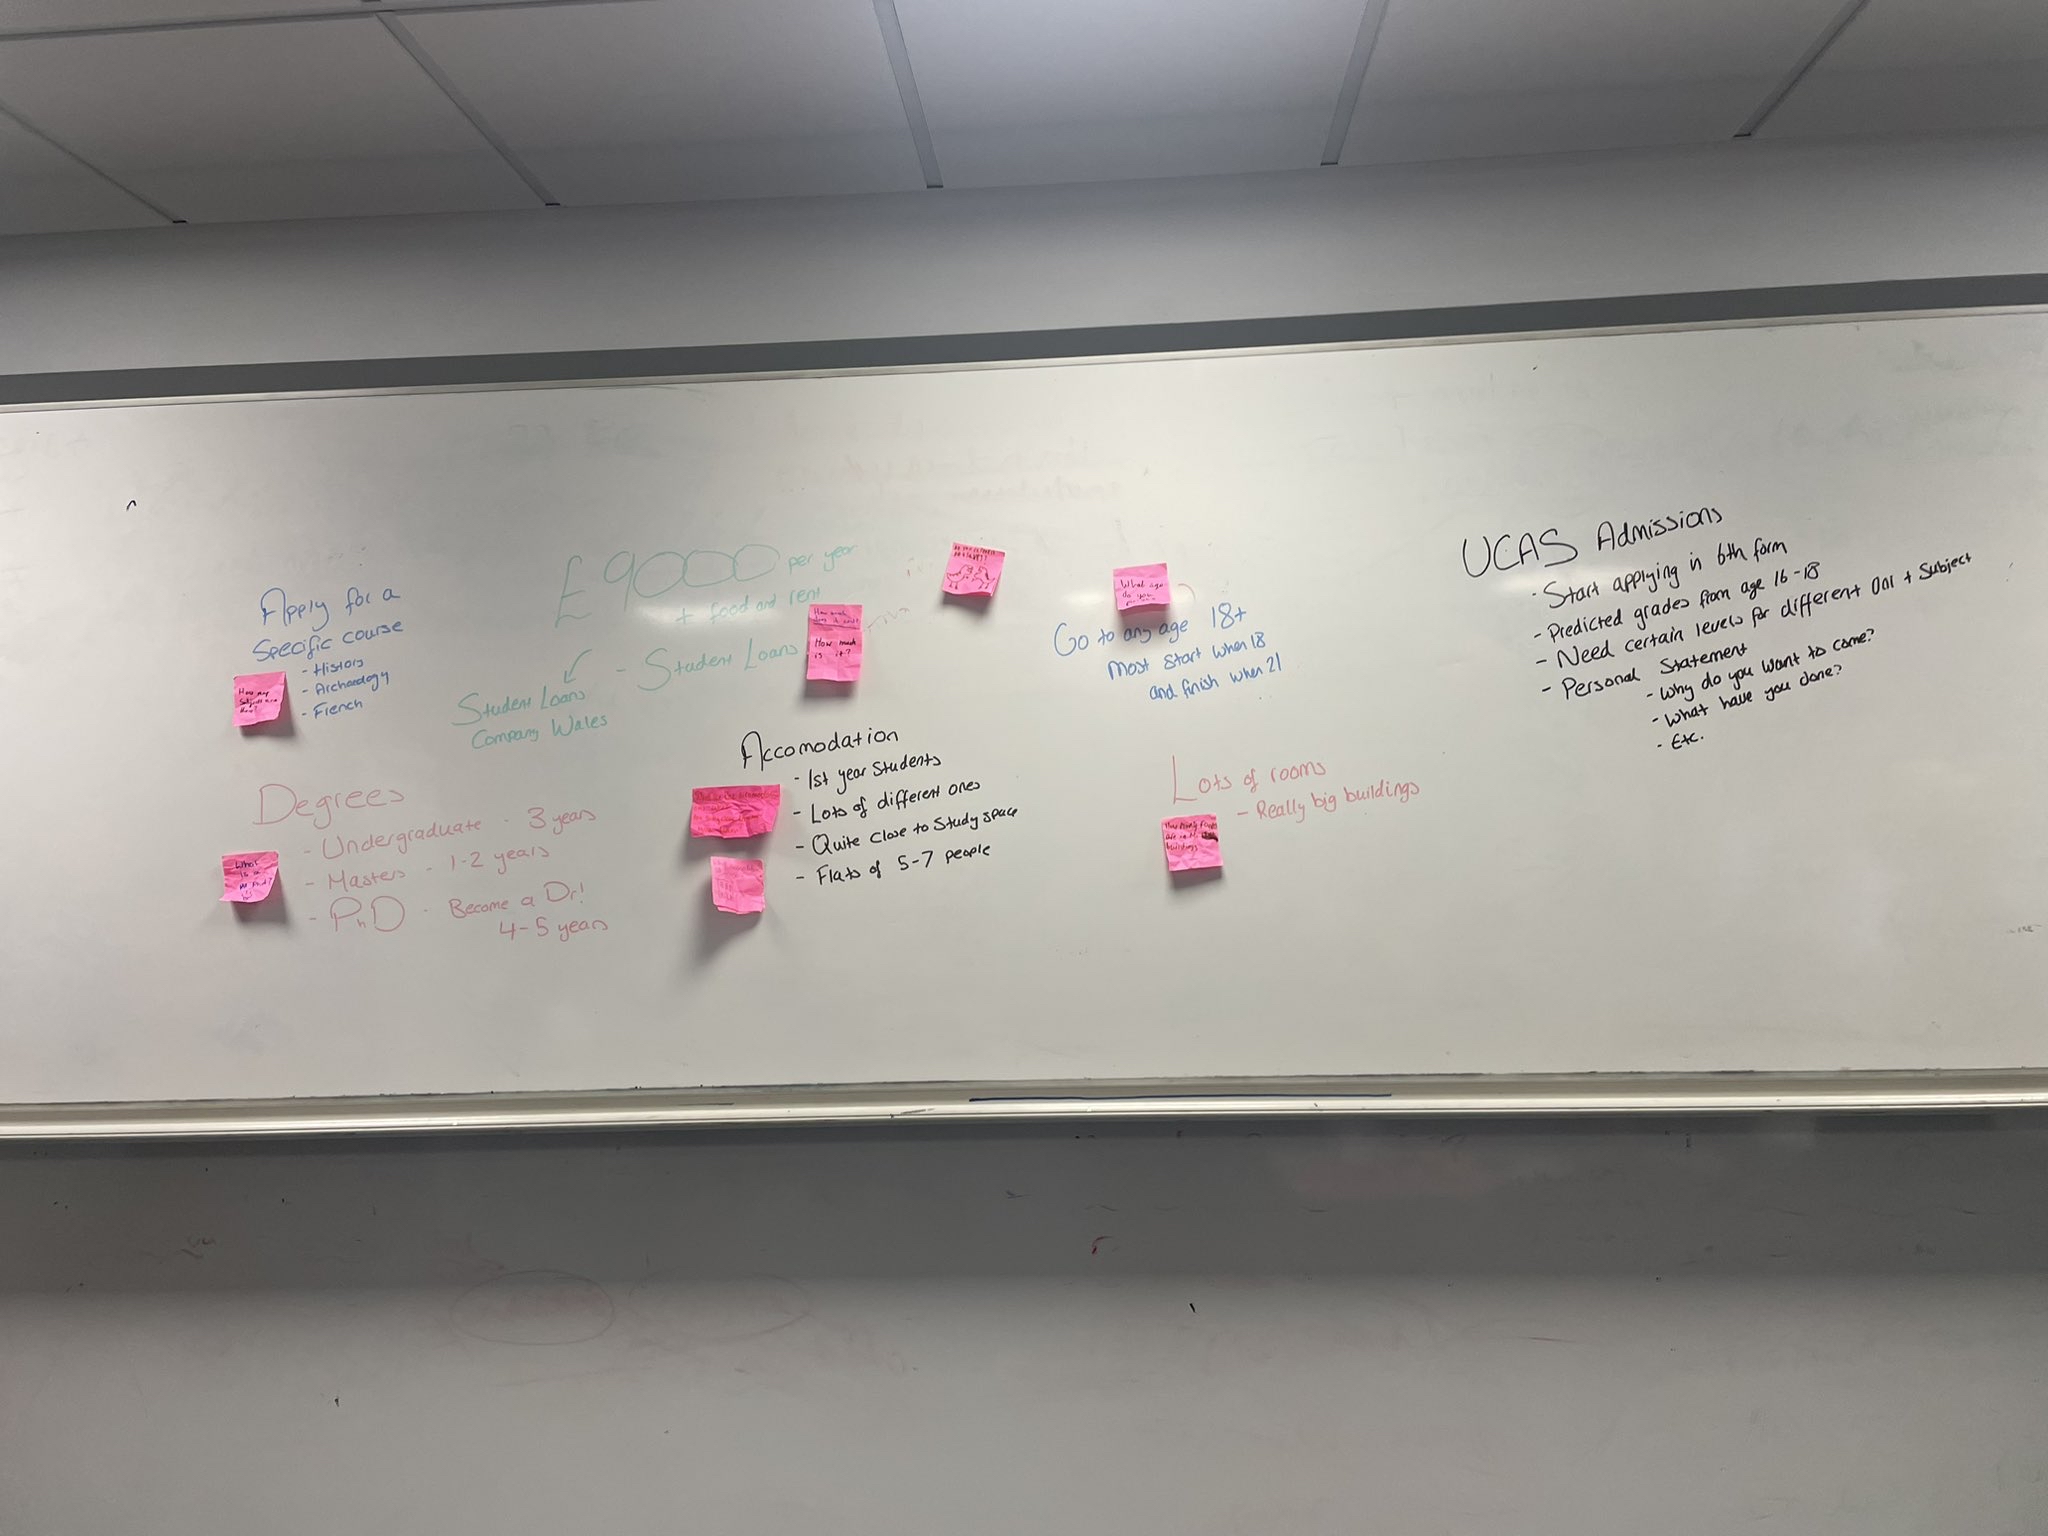 A large whiteboard covered in writing and post it notes from a university Q&A session.